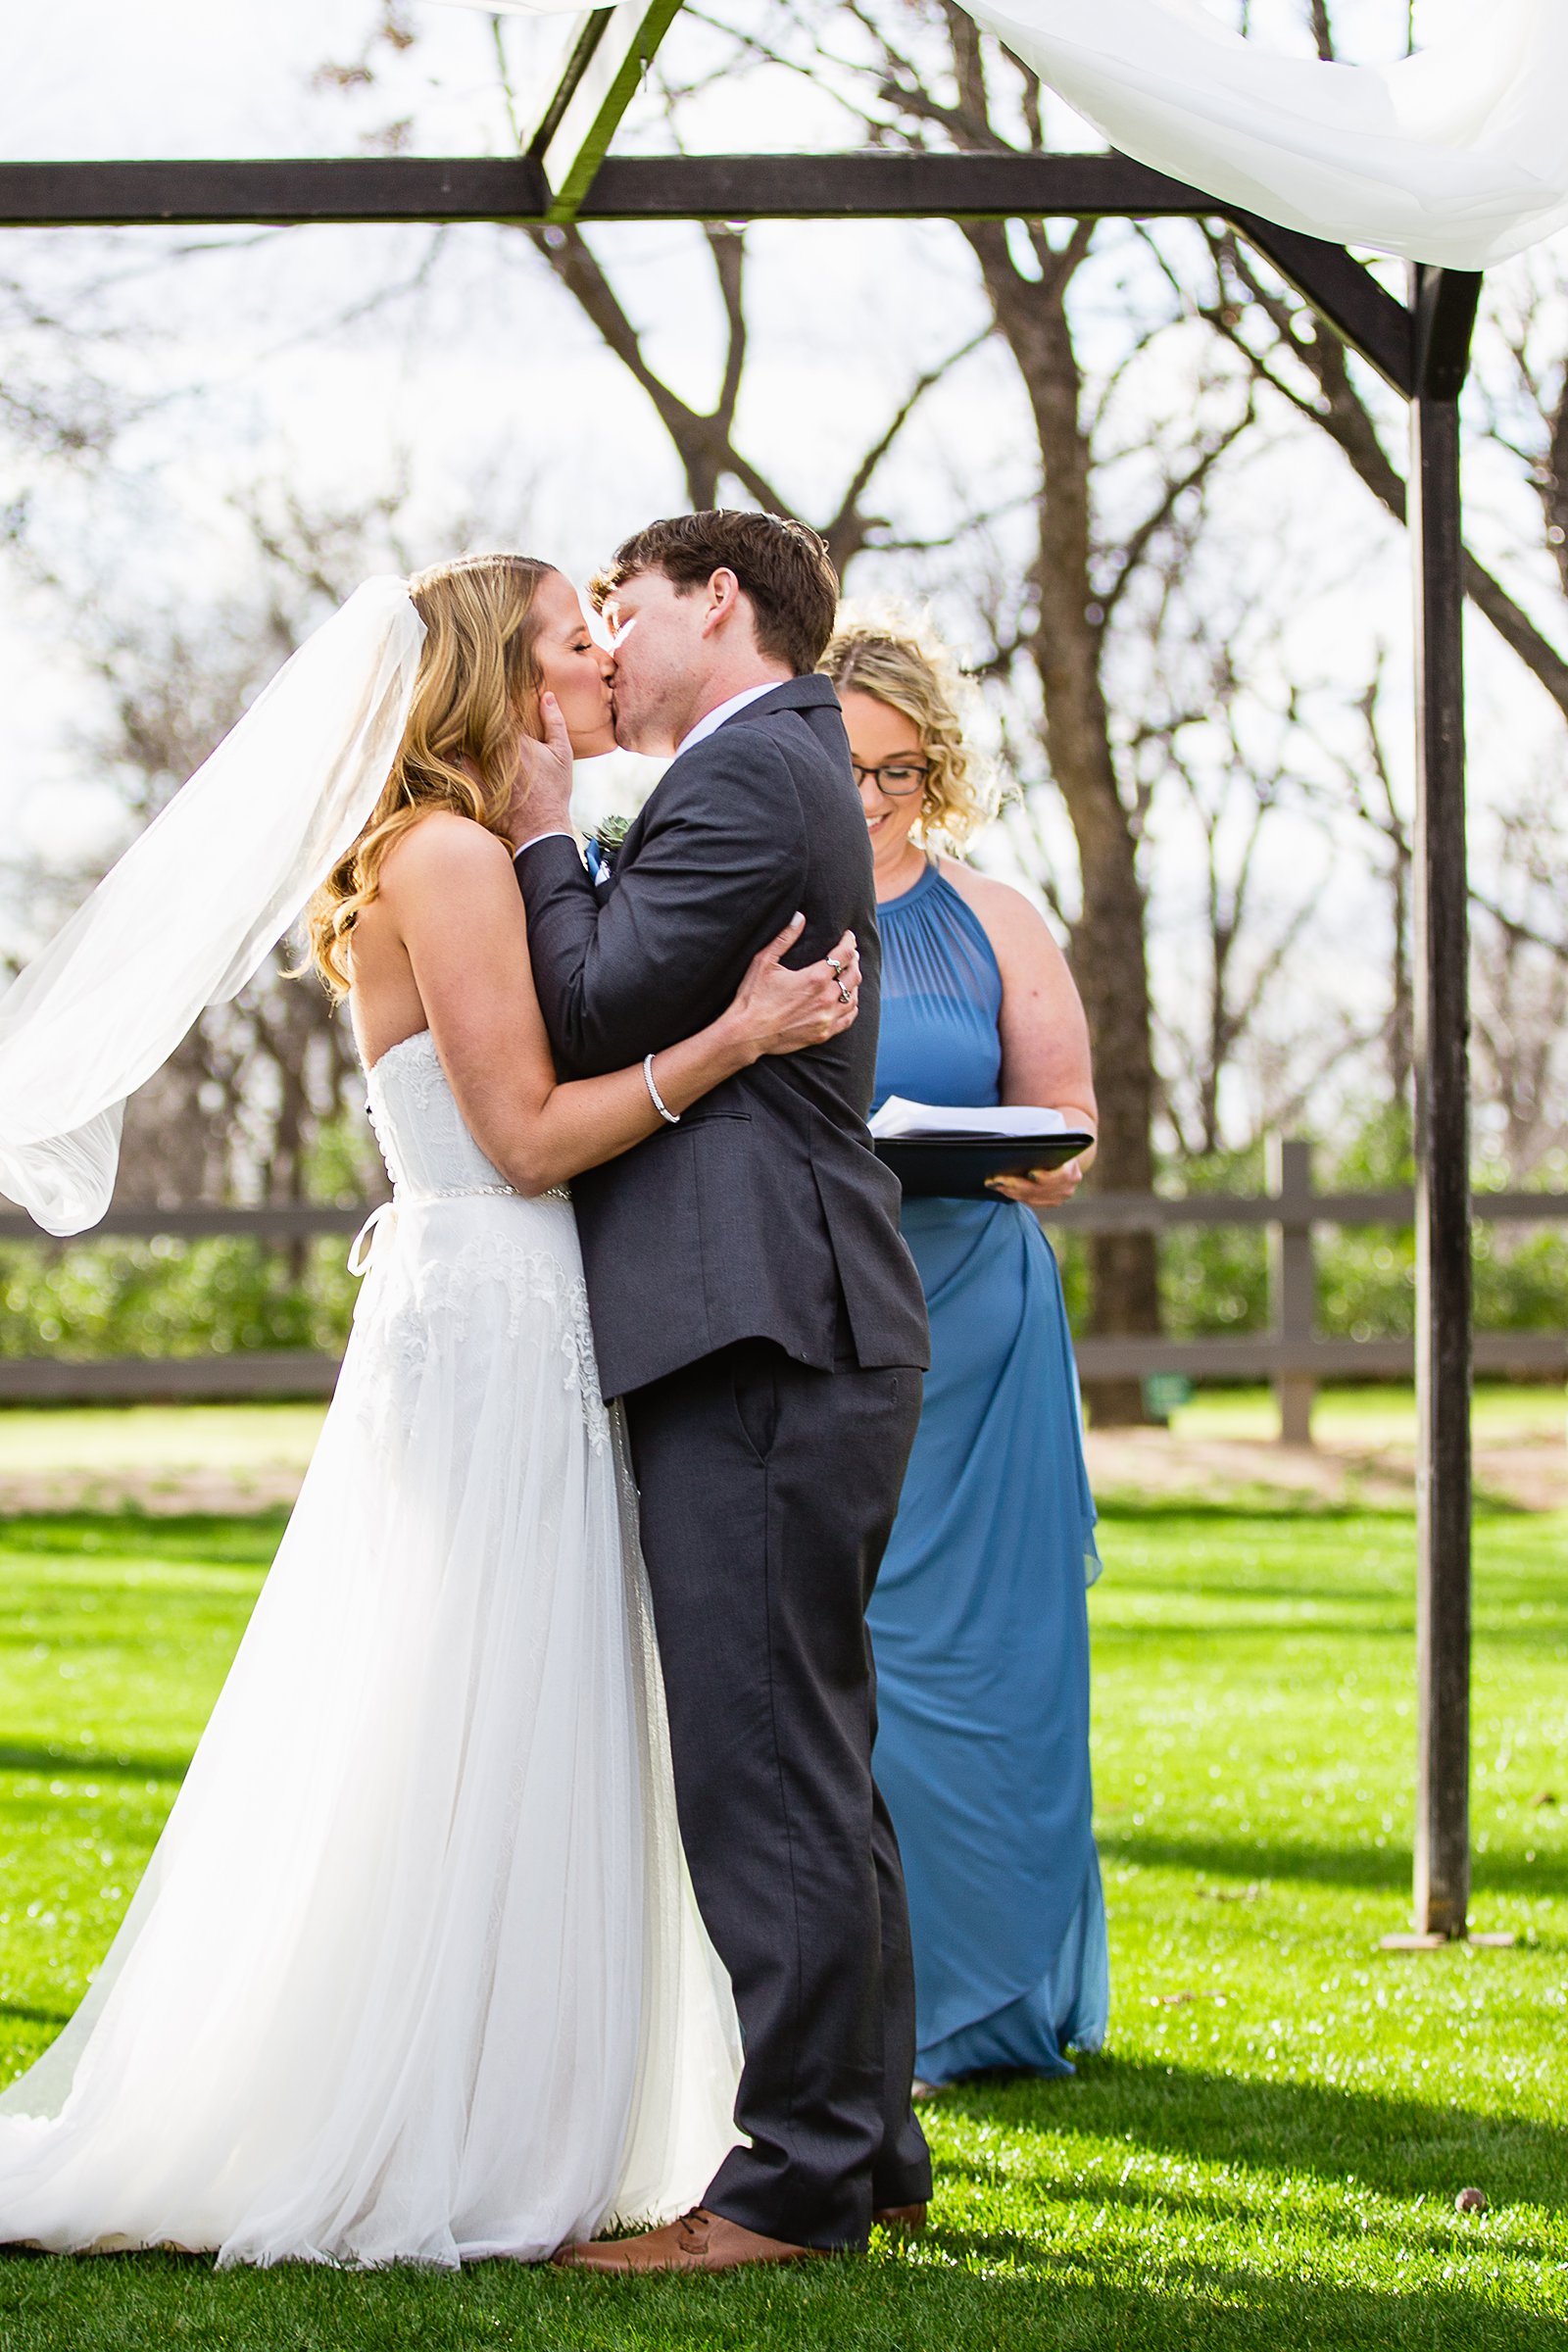 Bride and Groom share their first kiss during their wedding ceremony at Venue At The Grove by Arizona wedding photographer PMA Photography.